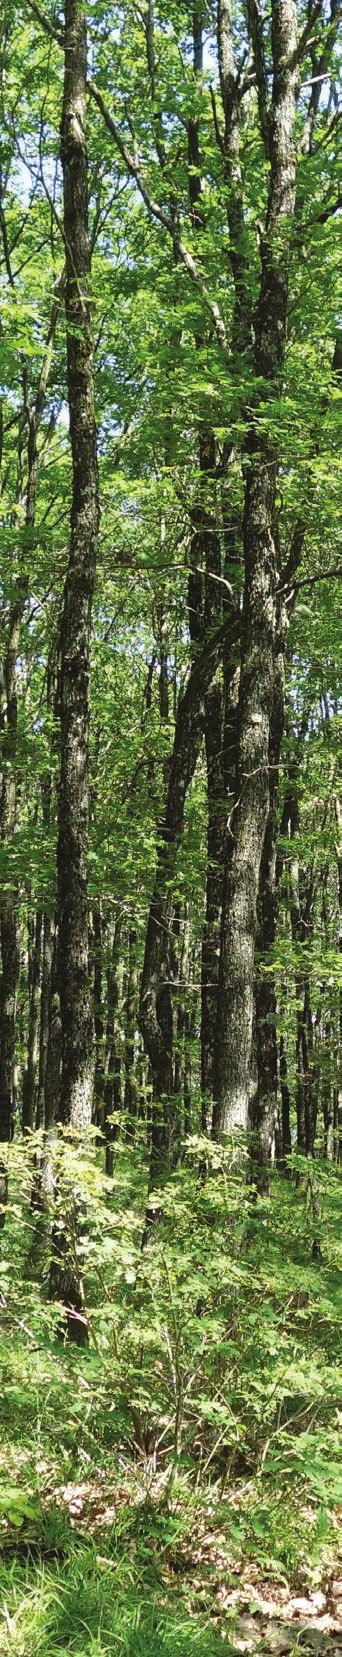 Kentucky Forestry Economic Contribution Report 2016 Authors* Jeff Stringer, Billy Thomas, Bobby Ammerman, Thomas Ochuodho, Alison Davis Executive Summary Forests play a pivotal role in Kentucky s